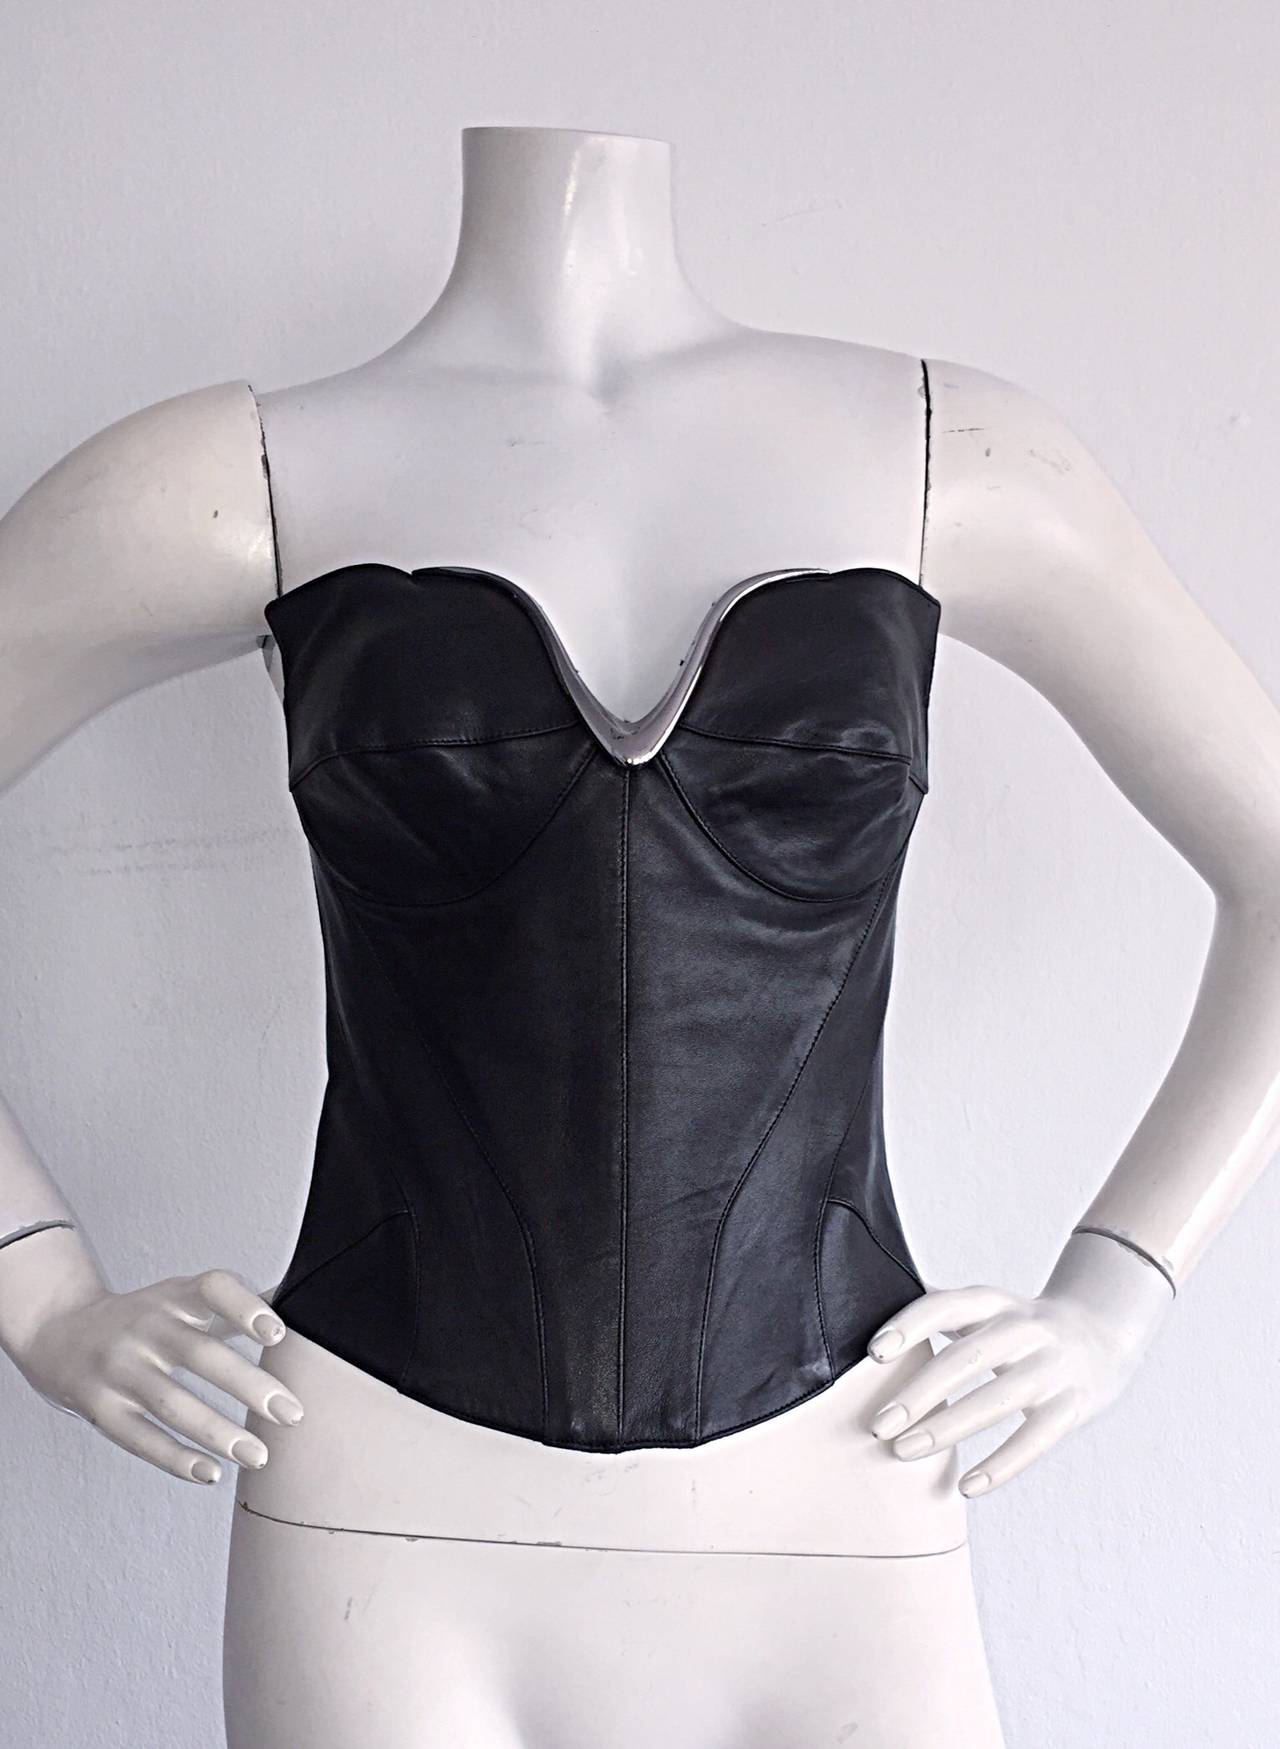 Iconic Vintage Thierry Mugler Couture Black Leather Space Age Corset Bustier 1